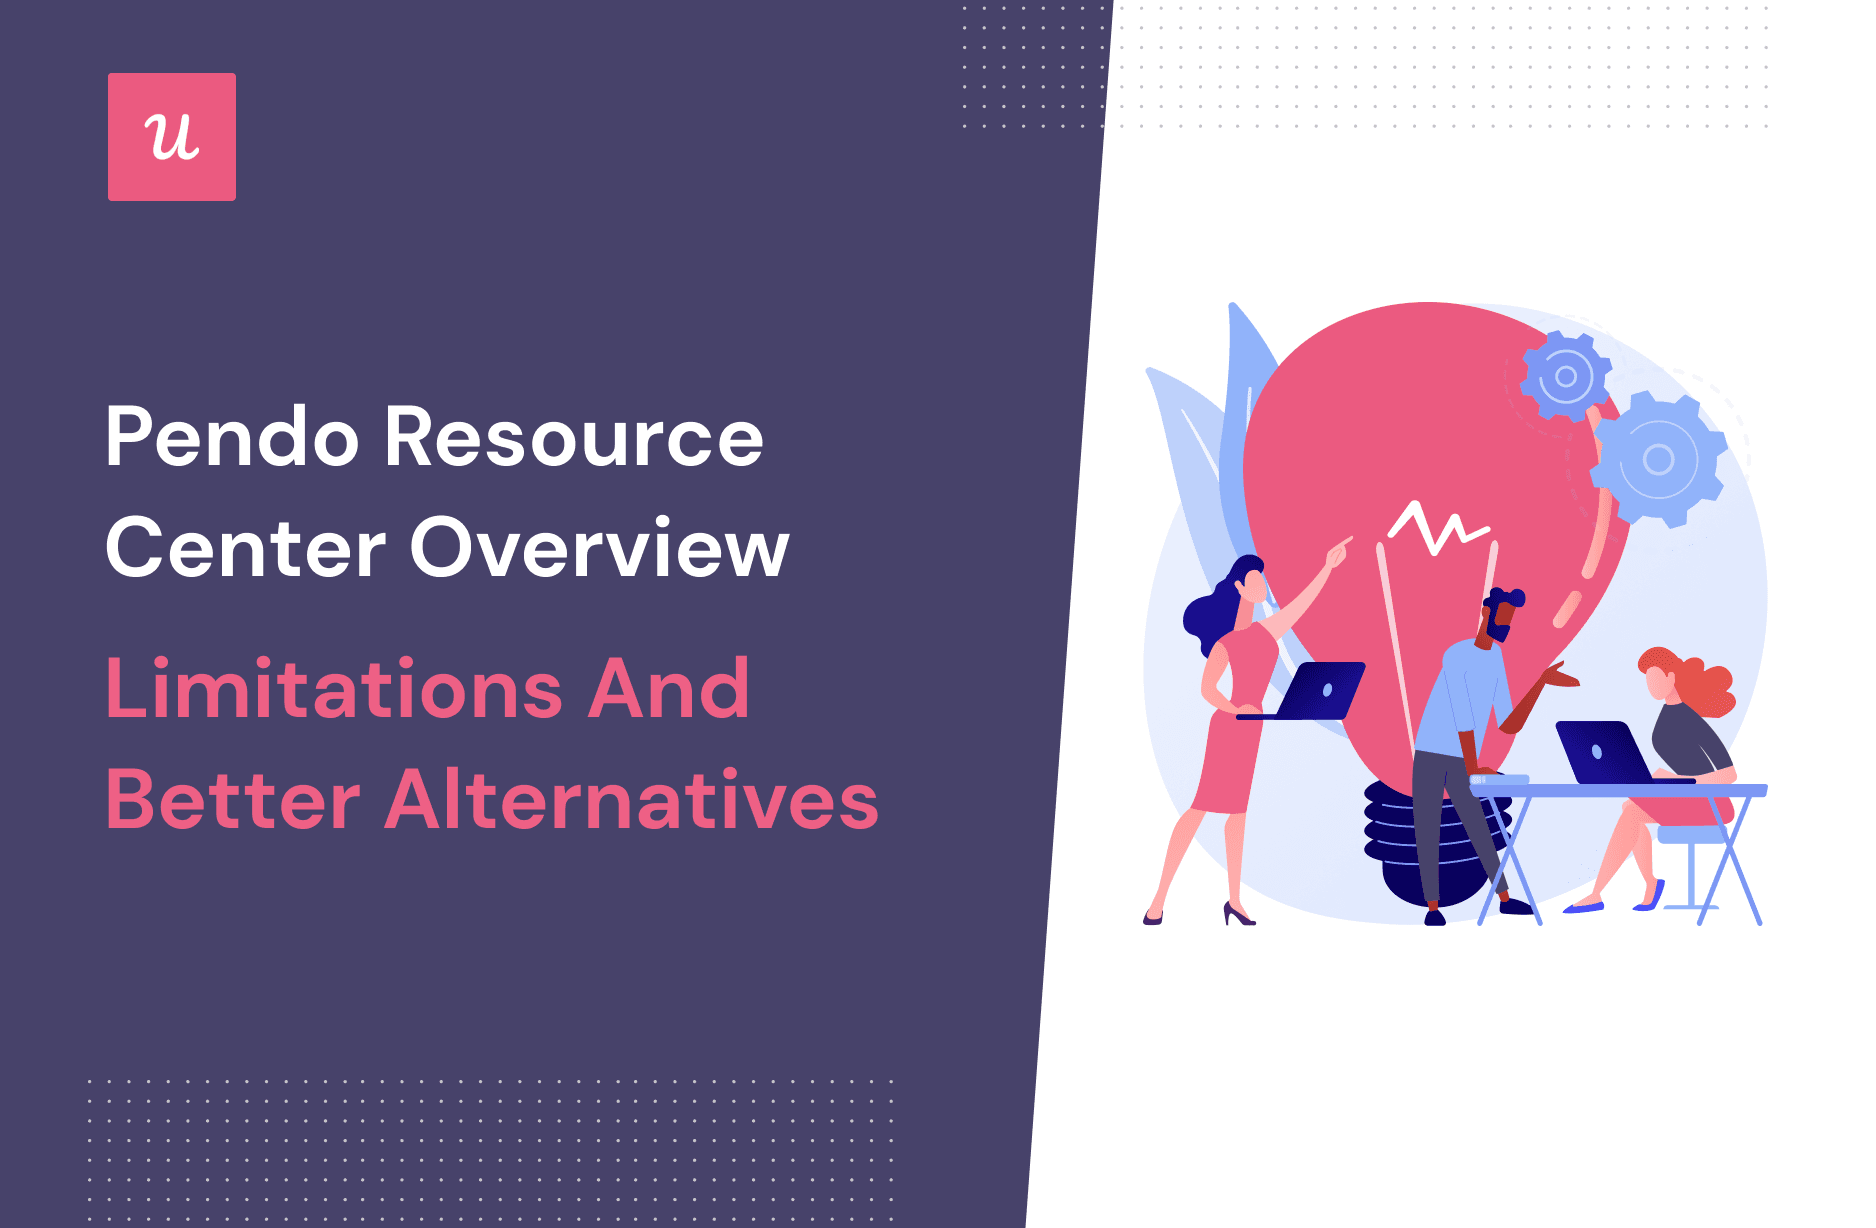 Pendo Resource Center Feature-Limitations and Better Alternatives